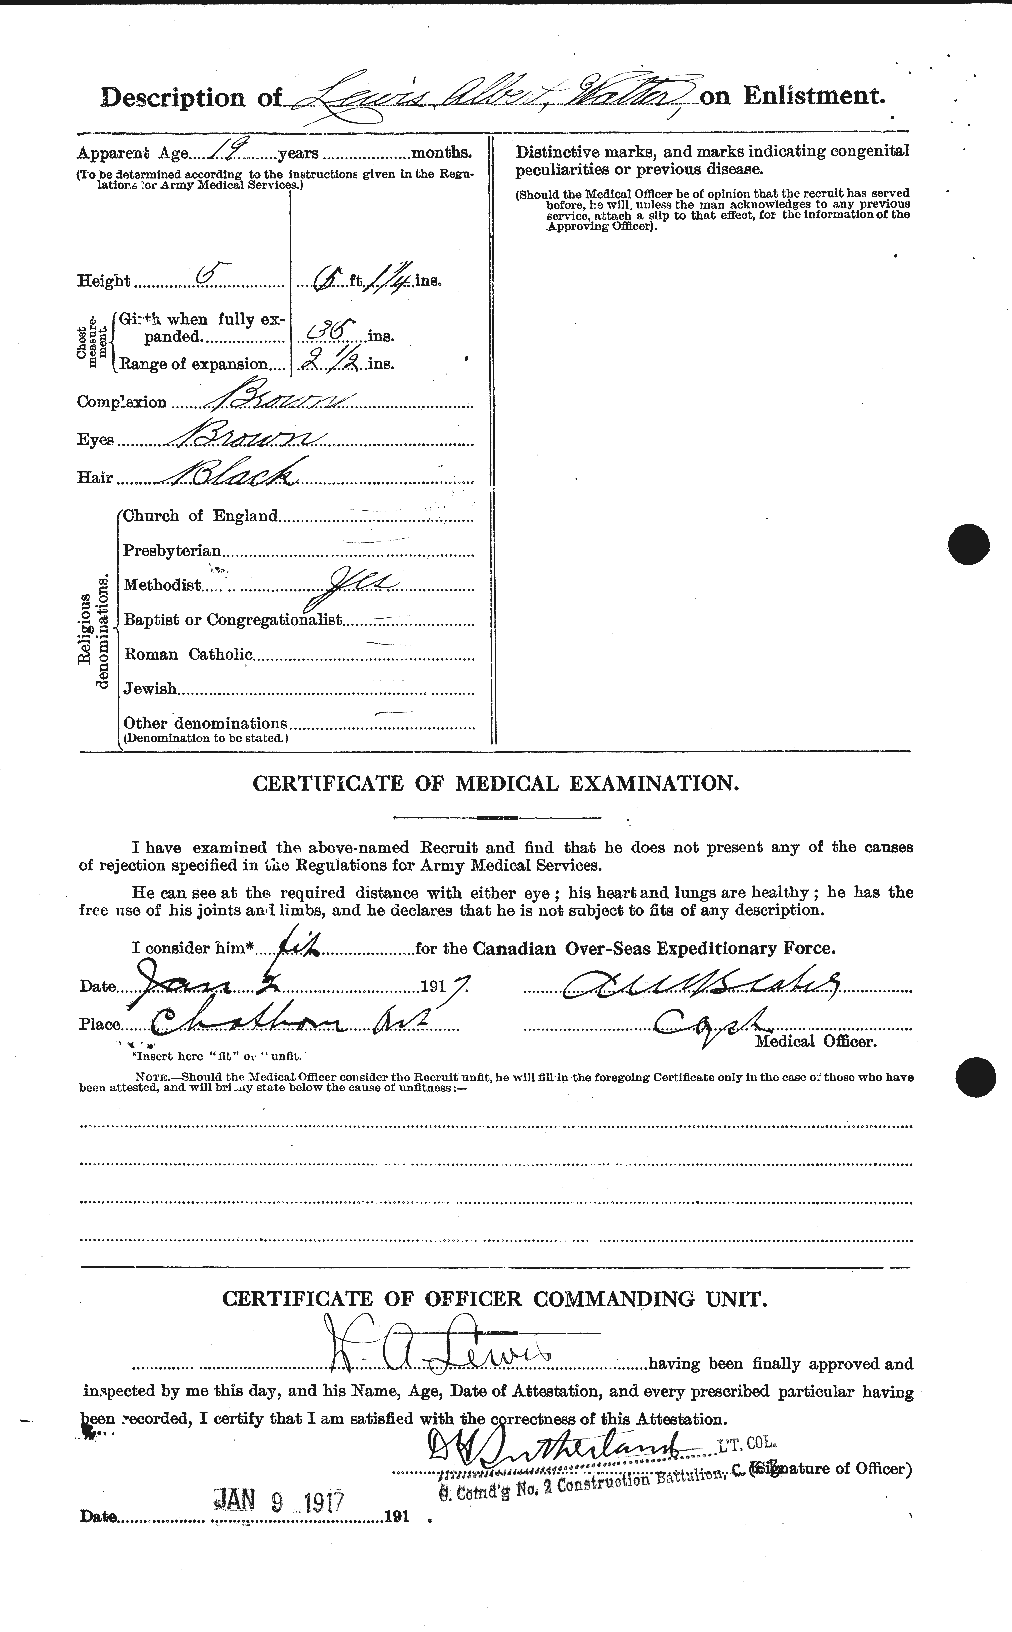 Personnel Records of the First World War - CEF 464022b